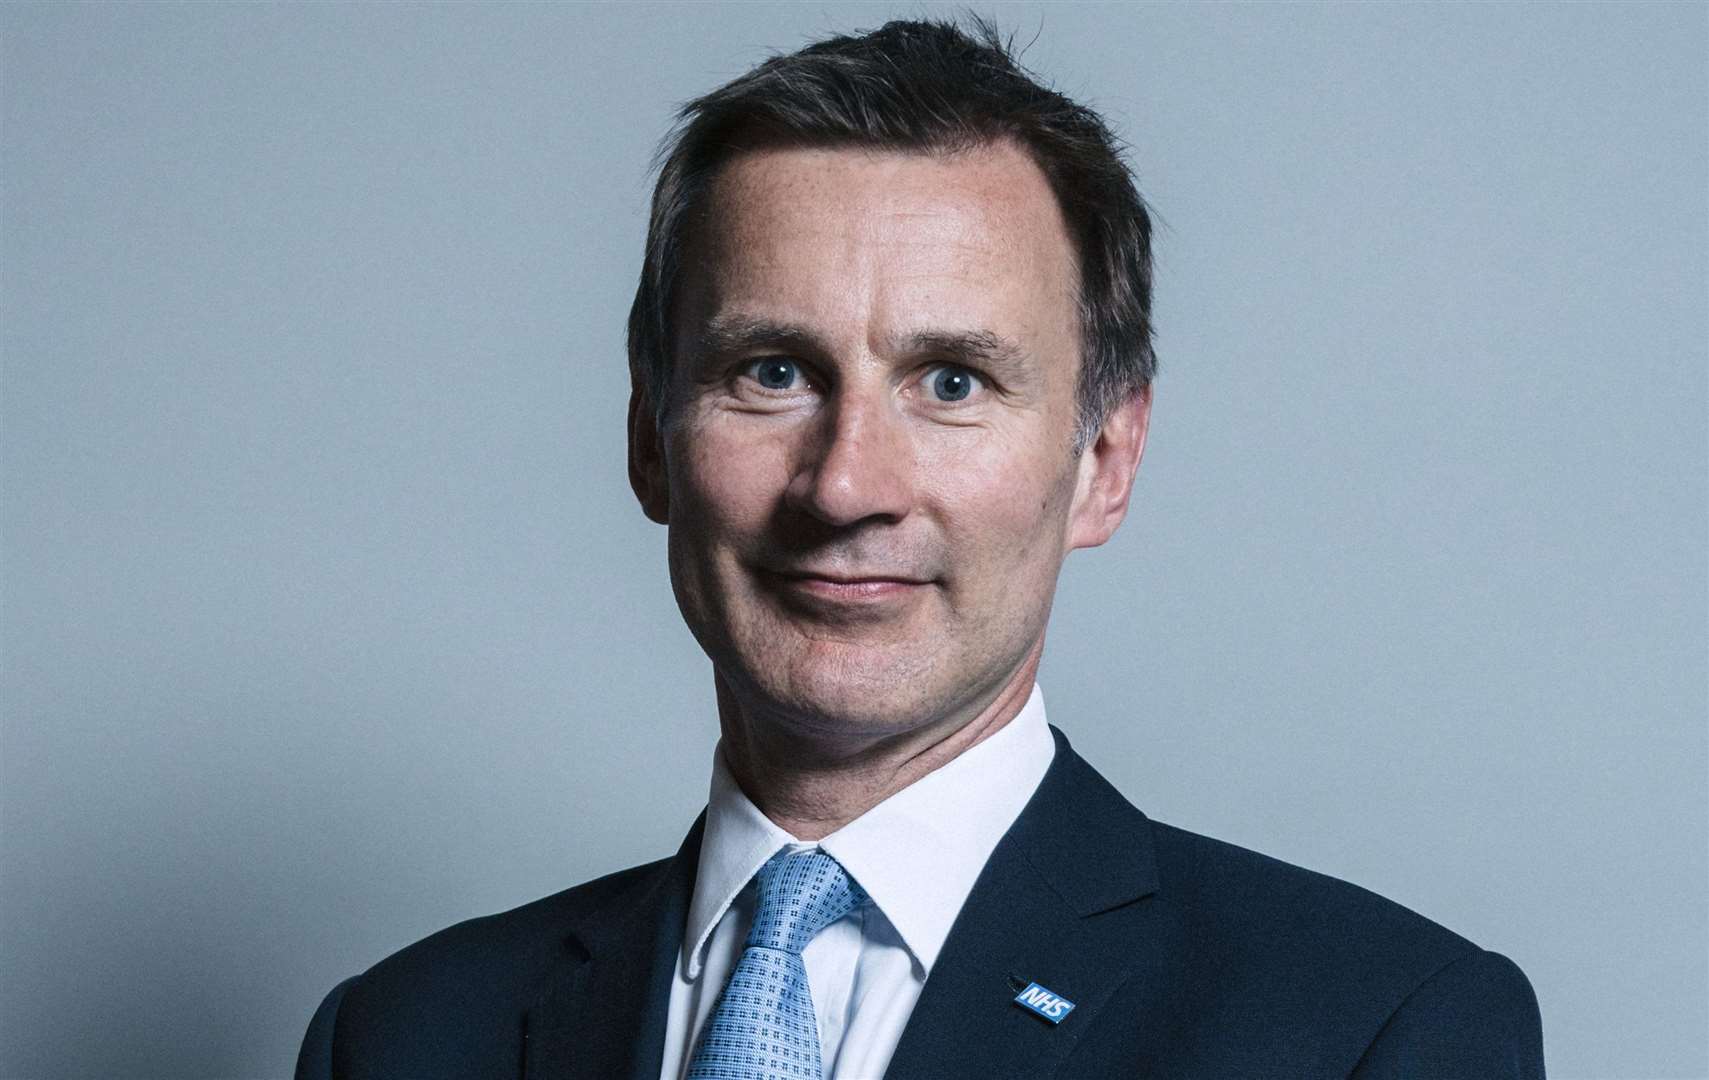 Chancellor Jeremy Hunt says his government continues to work towards easing people's plight